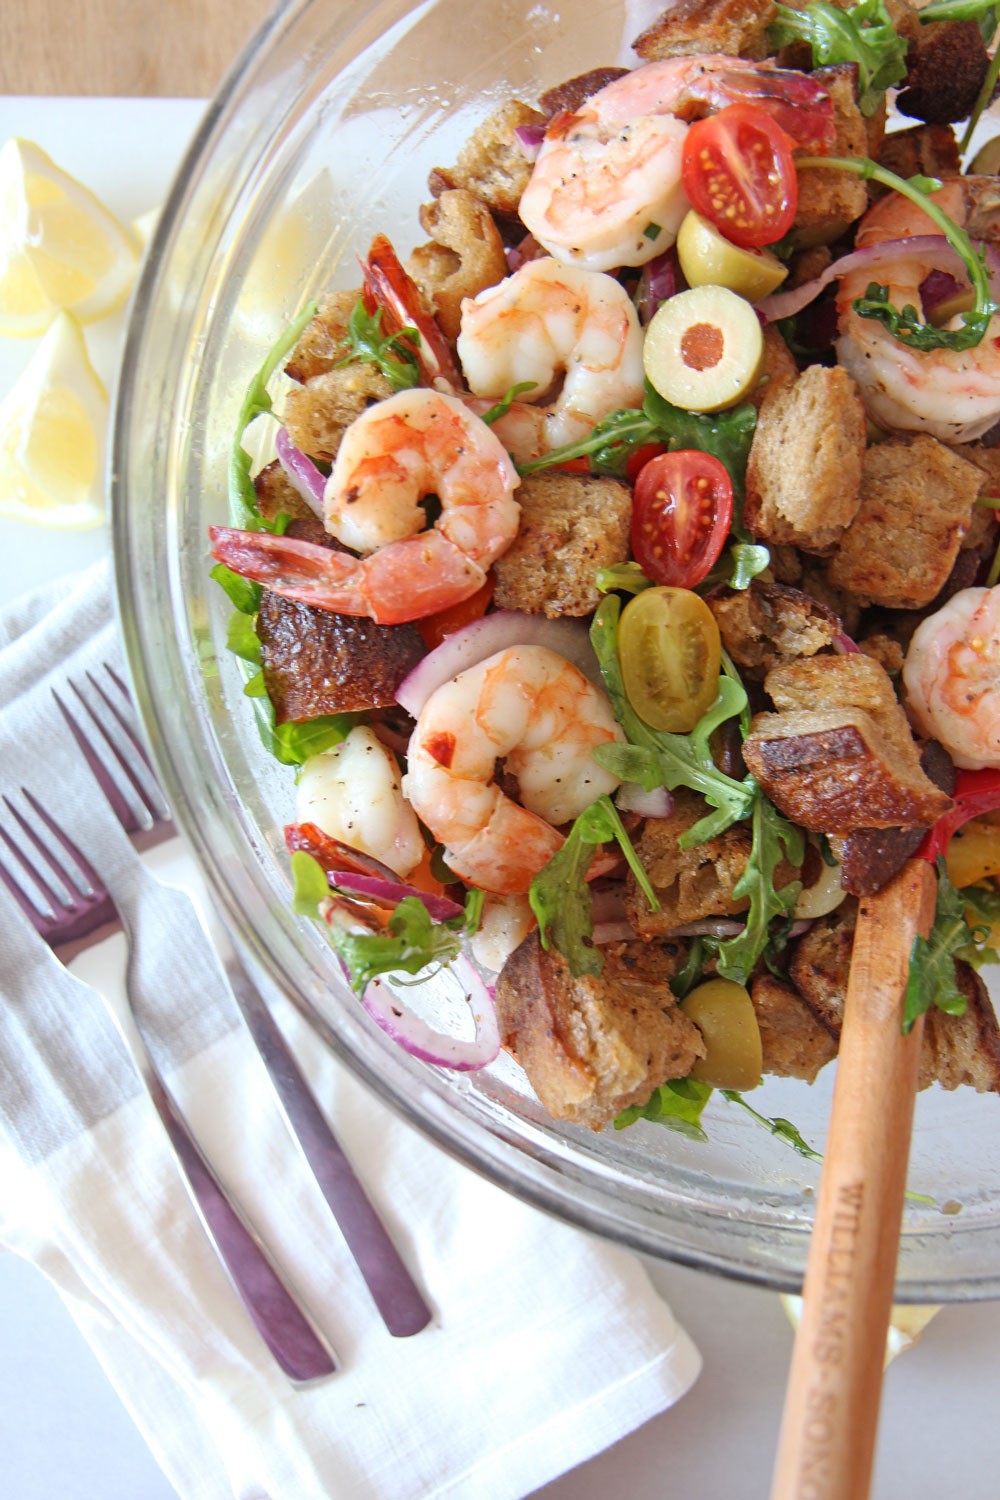 Shrimp and Garlic Bread Panzanella Salad. Grab day old sourdough bread, butter, juicy sheet pan shrimp, sweet tomatoes, and peppery arugula. This is the perfect salad for a crowd or healthy dinner. Happy Coking! www.ChopHappy.com #PanzanellaSalad #saladrecipe